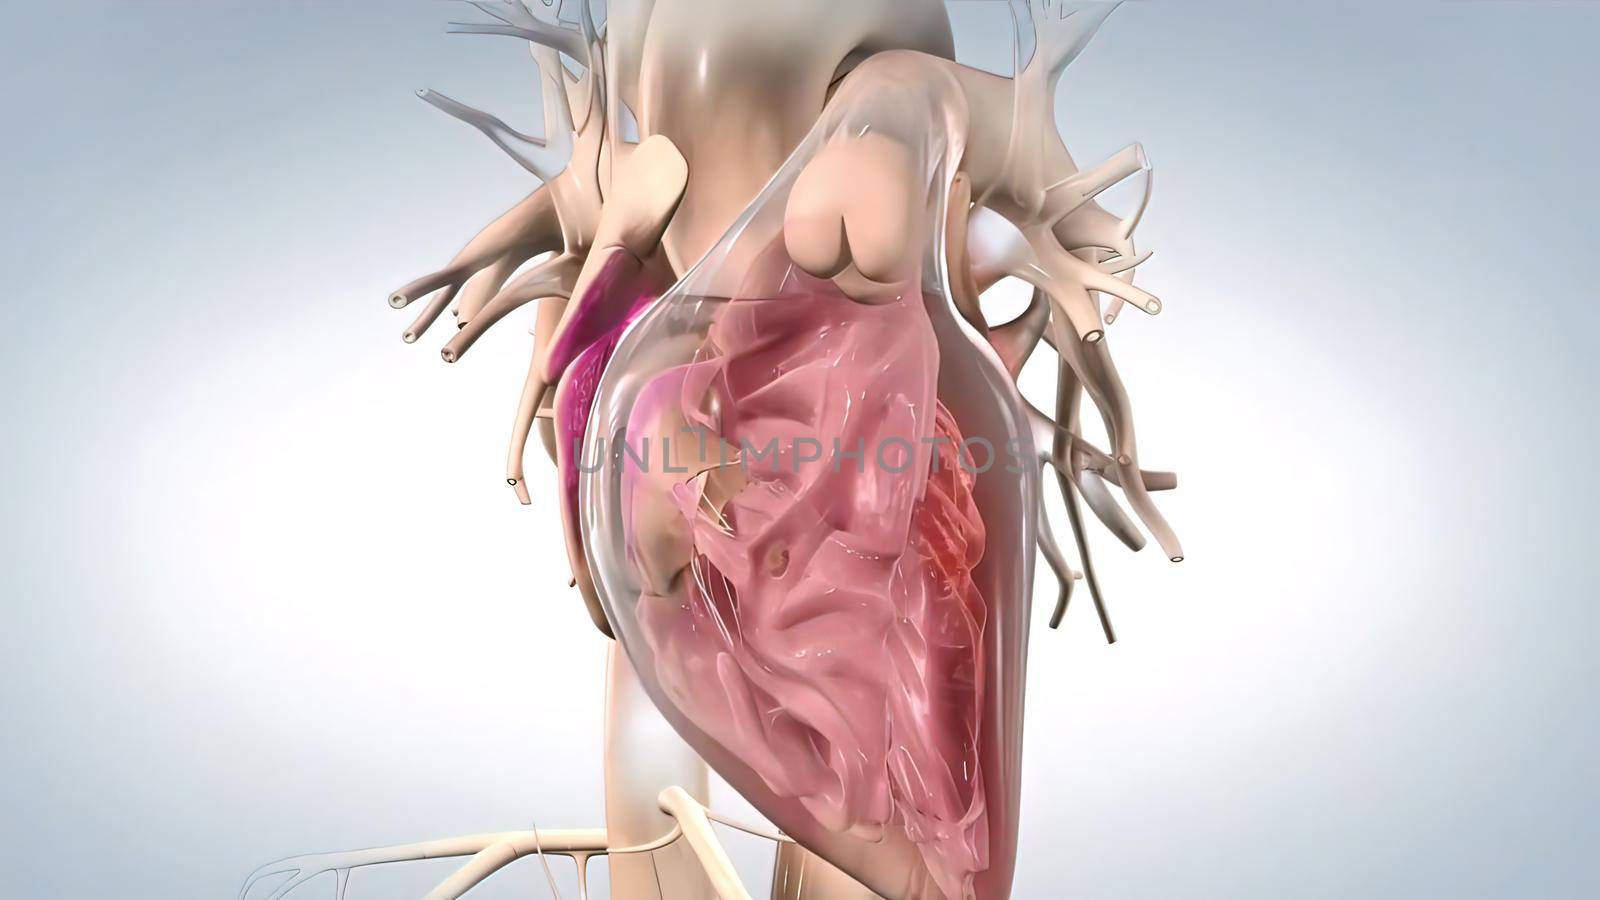 Systole, period of contraction of the ventricles of the heart that occurs between the first and second heart sounds of the cardiac cycle. 3d illustration